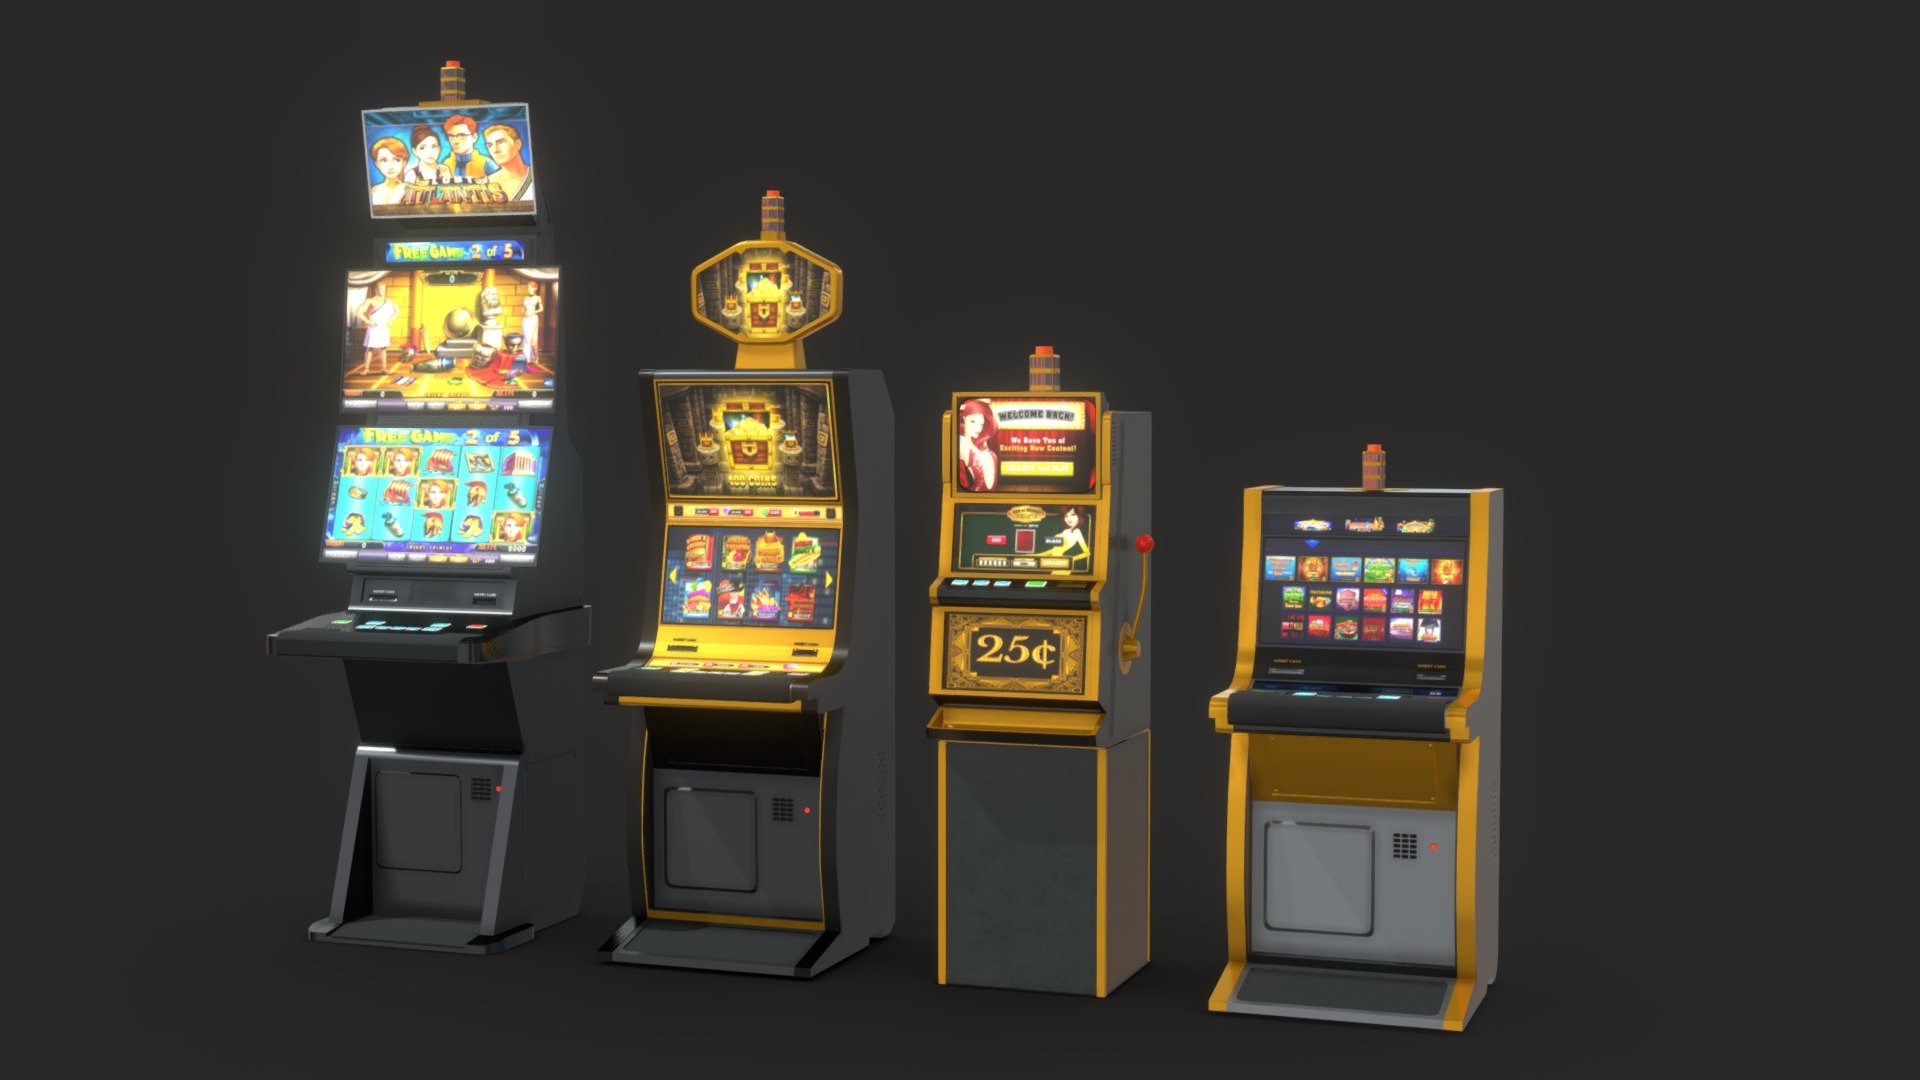 Las Vegas Casino Slot Machine Pack Volume 1. High Poly to spec. Textured, ready for VR / AR

Includes :
* 3 Screen Digital Slot Machine
* 2 Screen Digital Slot Machine with Large Topper
* 2 Screen Digital Pull Slot
* 1 Screen Digital Video Poker Machine
* Rows and Collumns Geometry nodes with procedural settings for custimization. 
* Wall Distrobution Geometry nodes with procedural settings for custimization.

These geonodes included help with optimization of distrobution of slot machines. Fully customizable spacing, row gaps, and slot machine randomization. 
Materials Seperated for easy PBR use. 2 FREE geometry nodes to array slot machines in rows and columns for better optimization. Blender 3.0 and up - Slot Machines Pack - Buy Royalty Free 3D model by Unreal Designer (@unrealdesigner.ig) 3d model